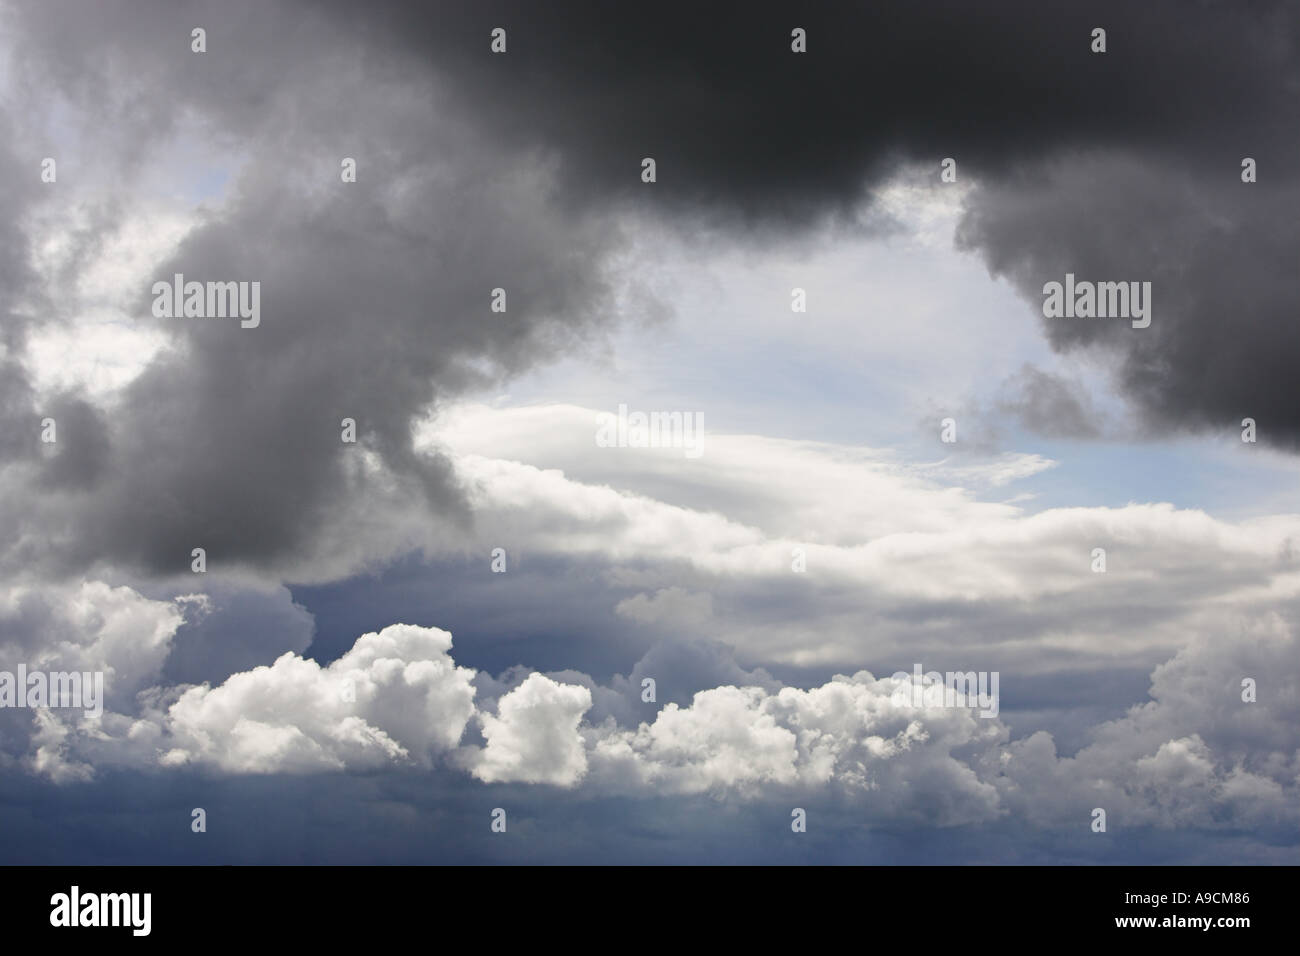 Stormy sky and storm clouds Stock Photo